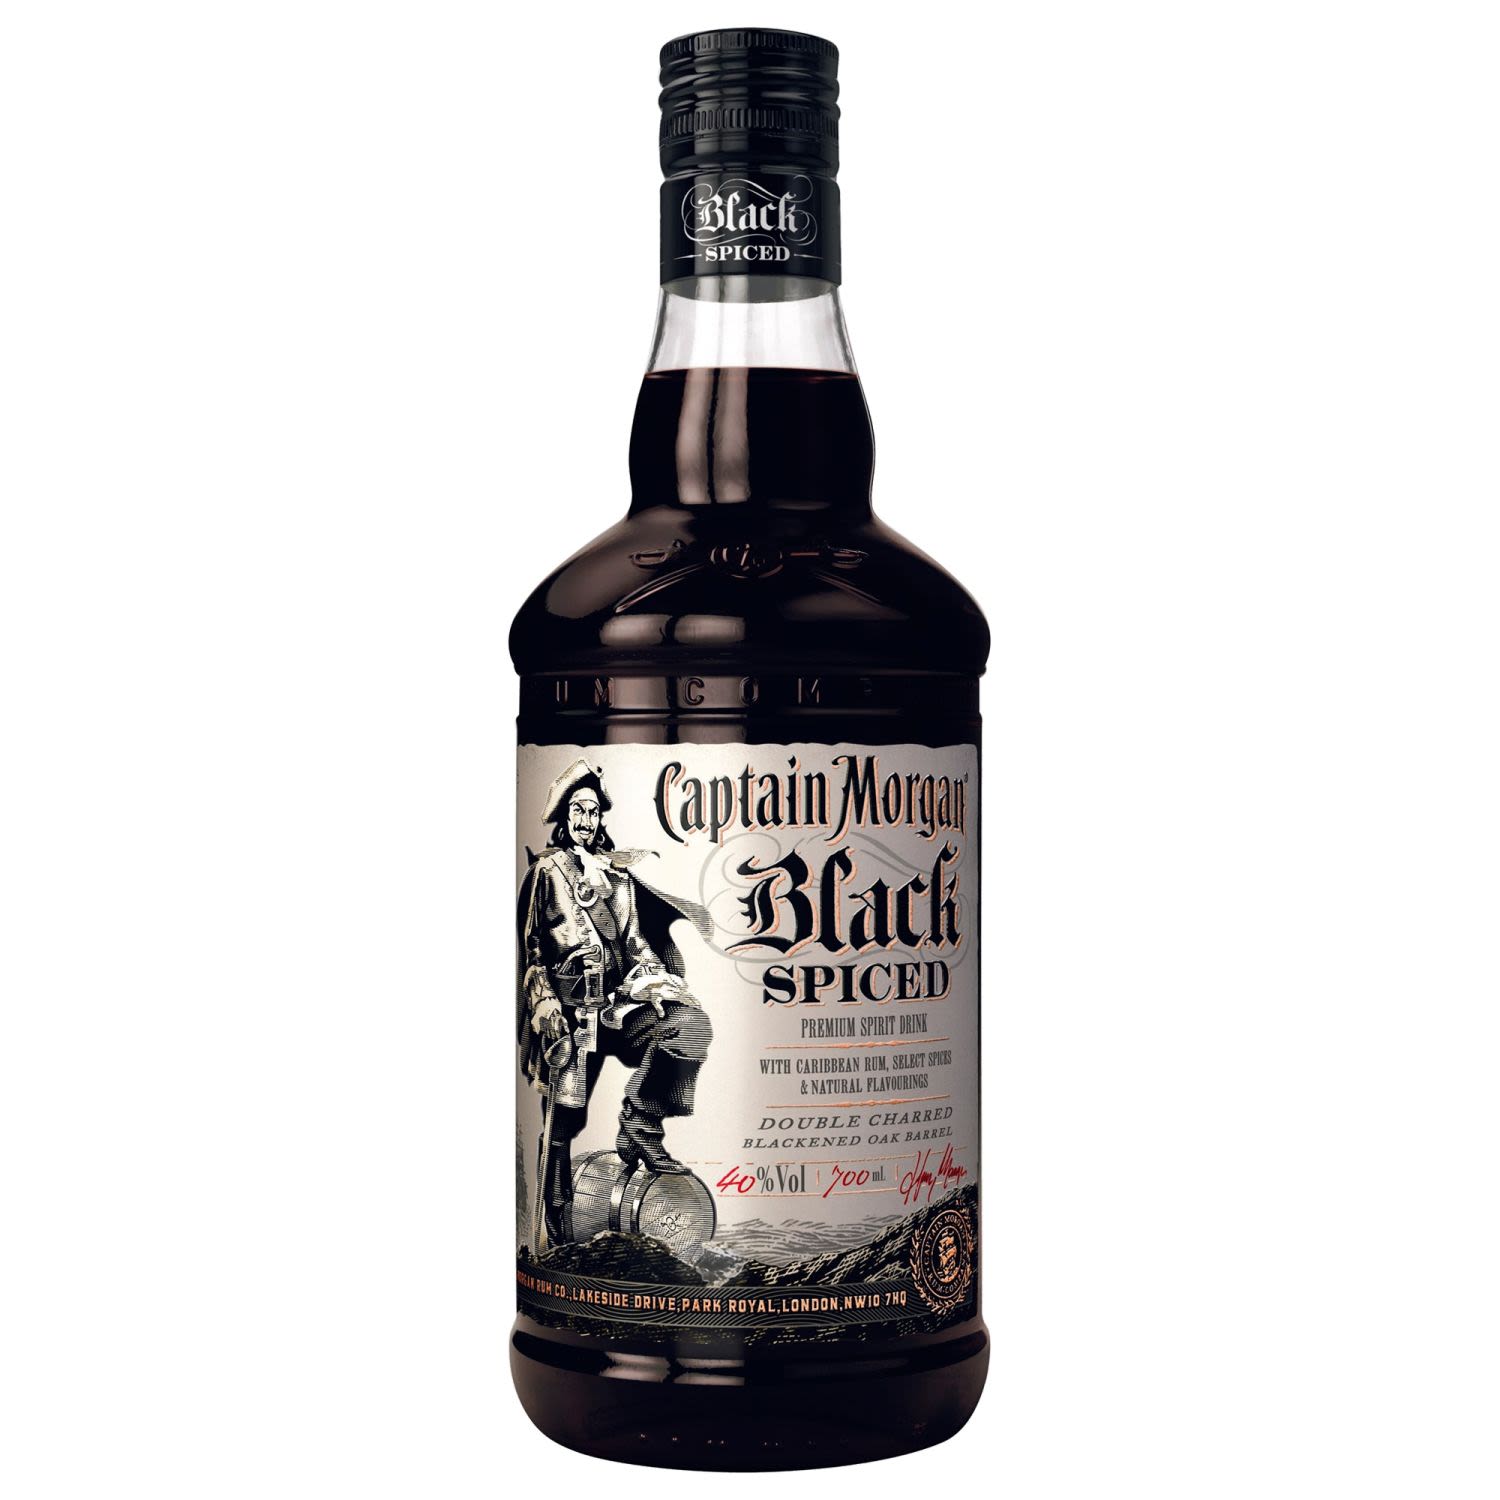 Inspired by the life, and death, of Henry Morgan, Captain Morgan's Black Spiced Rum is crafted from authentic Caribbean rum distilled from blackstrap molasses, select spices and natural flavourings, then finished in double charred blackened oak for its distinctive dark colour and premium, smooth taste. A bold flavour similar to the finest aged whiskies, nuances of warming spice and vanilla linger for a moment, then slip away for a delicious and silky finish.<br /> <br />Alcohol Volume: 40.00%<br /><br />Pack Format: Bottle<br /><br />Standard Drinks: 22.1</br /><br />Pack Type: Bottle<br /><br />Country of Origin: Jamaica<br />